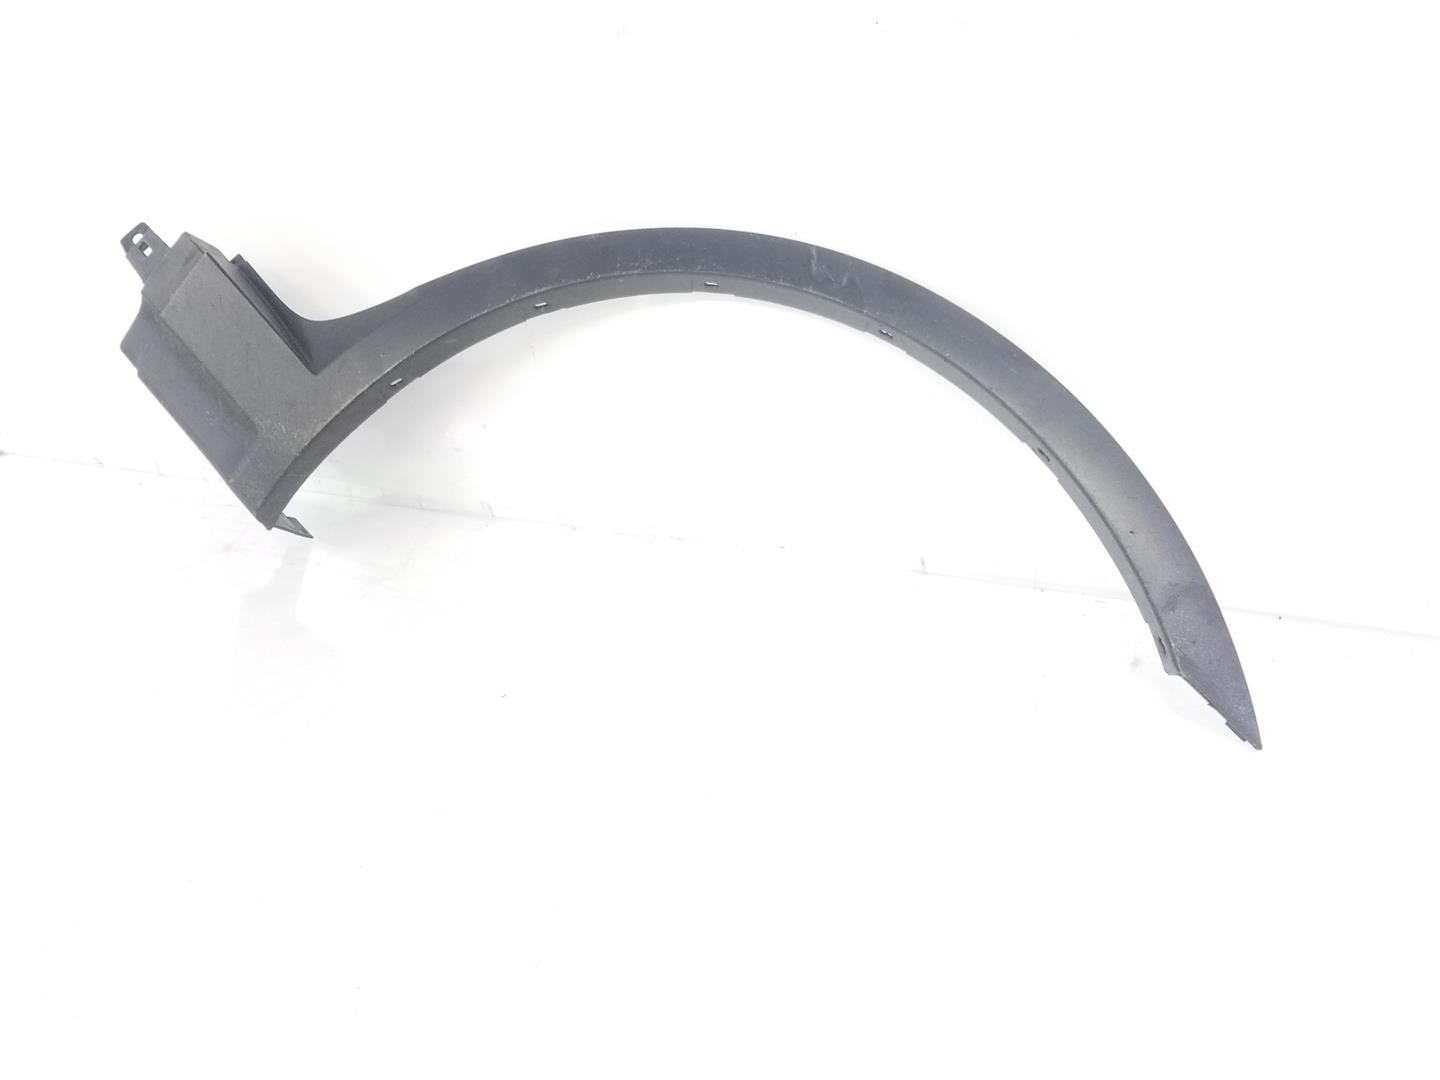 BMW X3 E83 (2003-2010) Front Right Fender Molding 51713405818, 51713405818 19773183